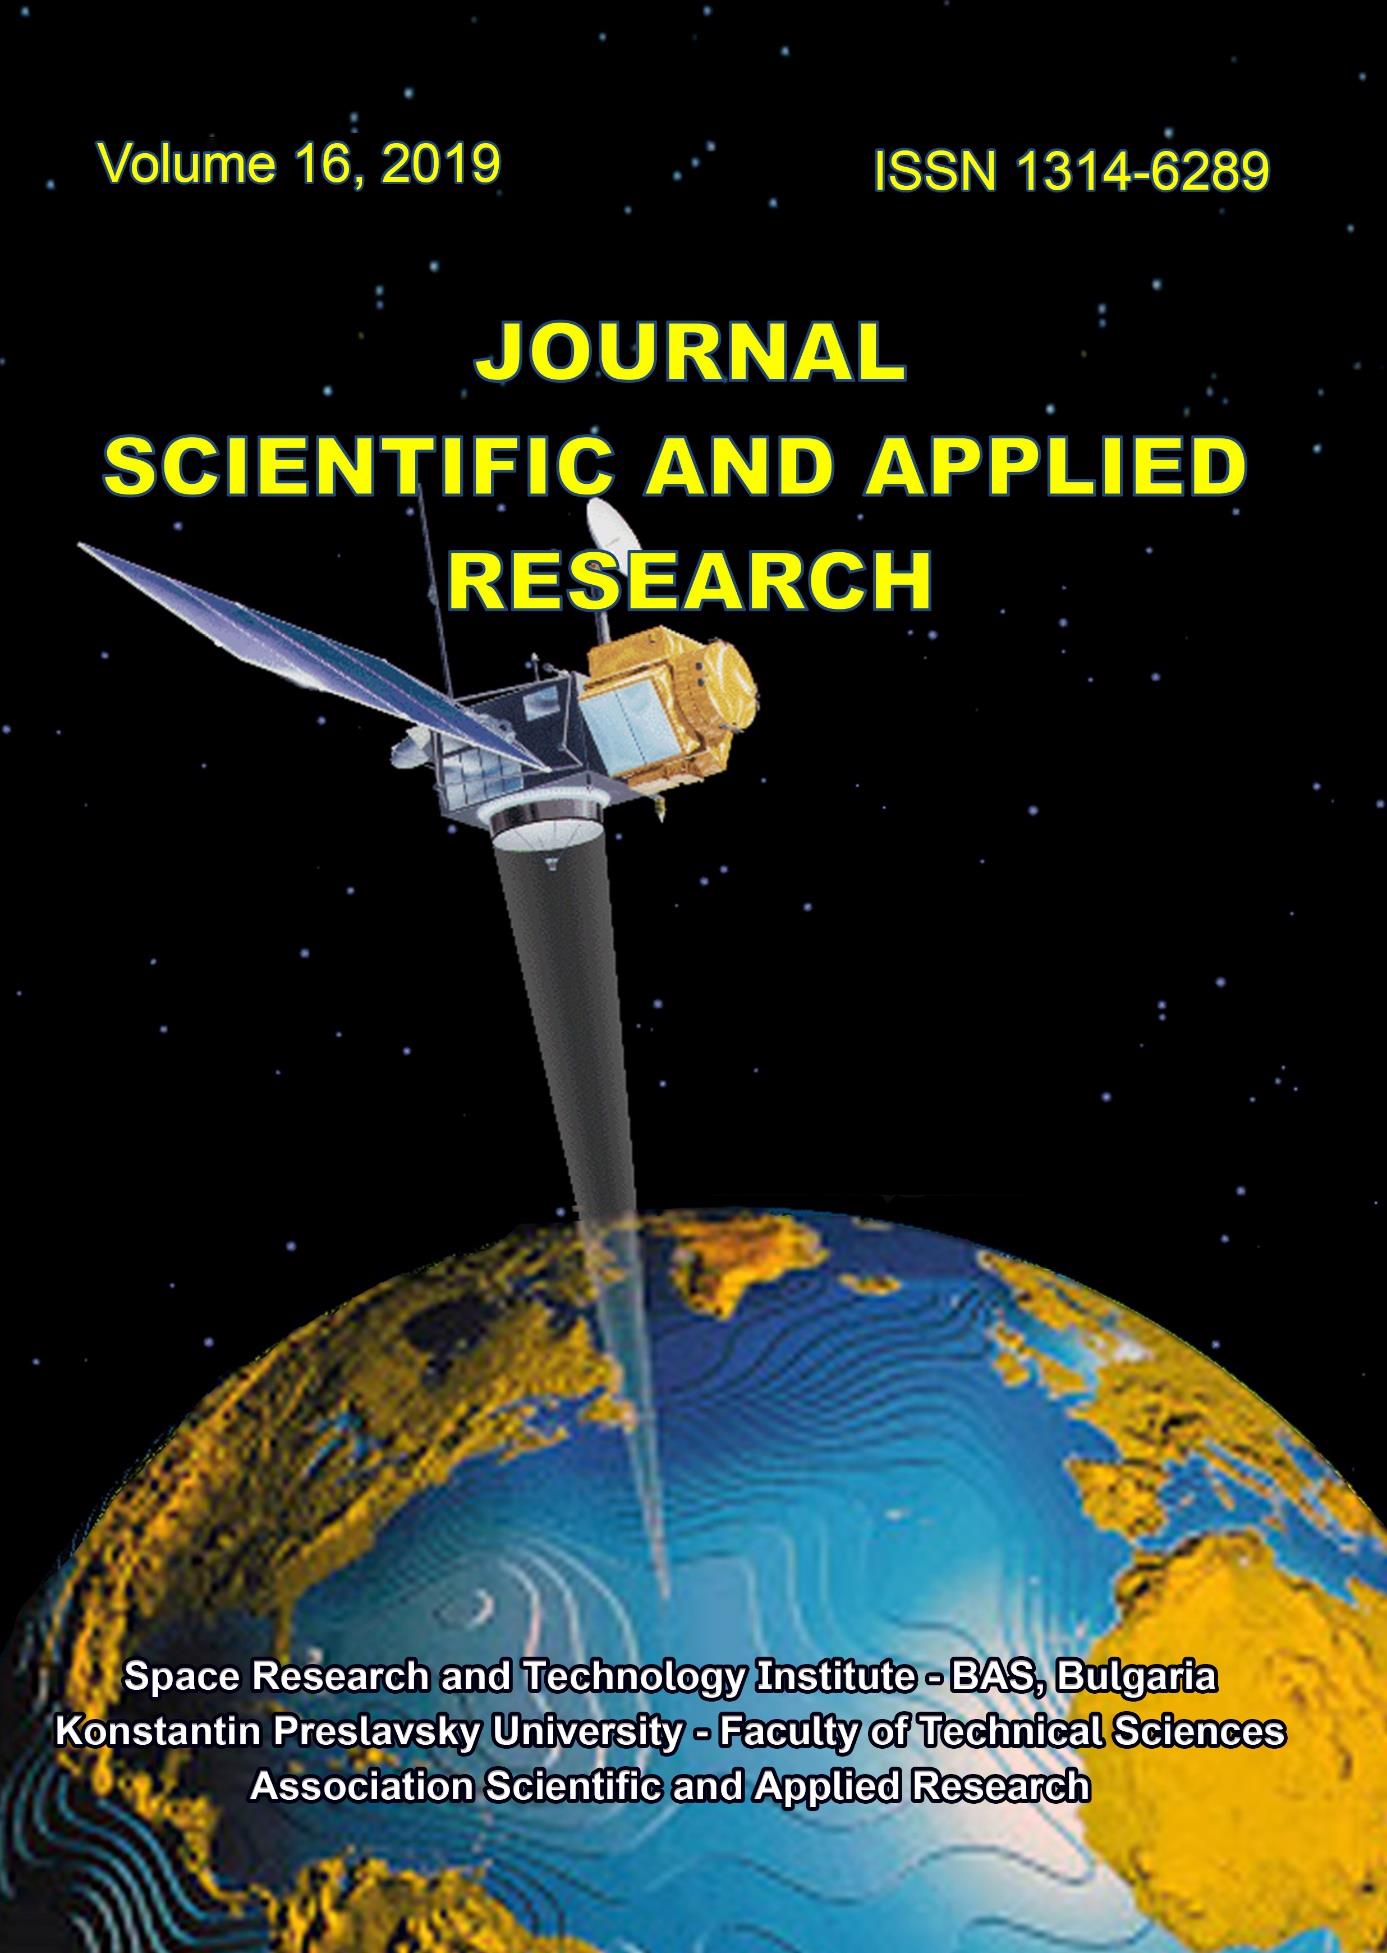 					View Vol. 16 No. 1 (2019): Journal Scientific and Applied Research
				